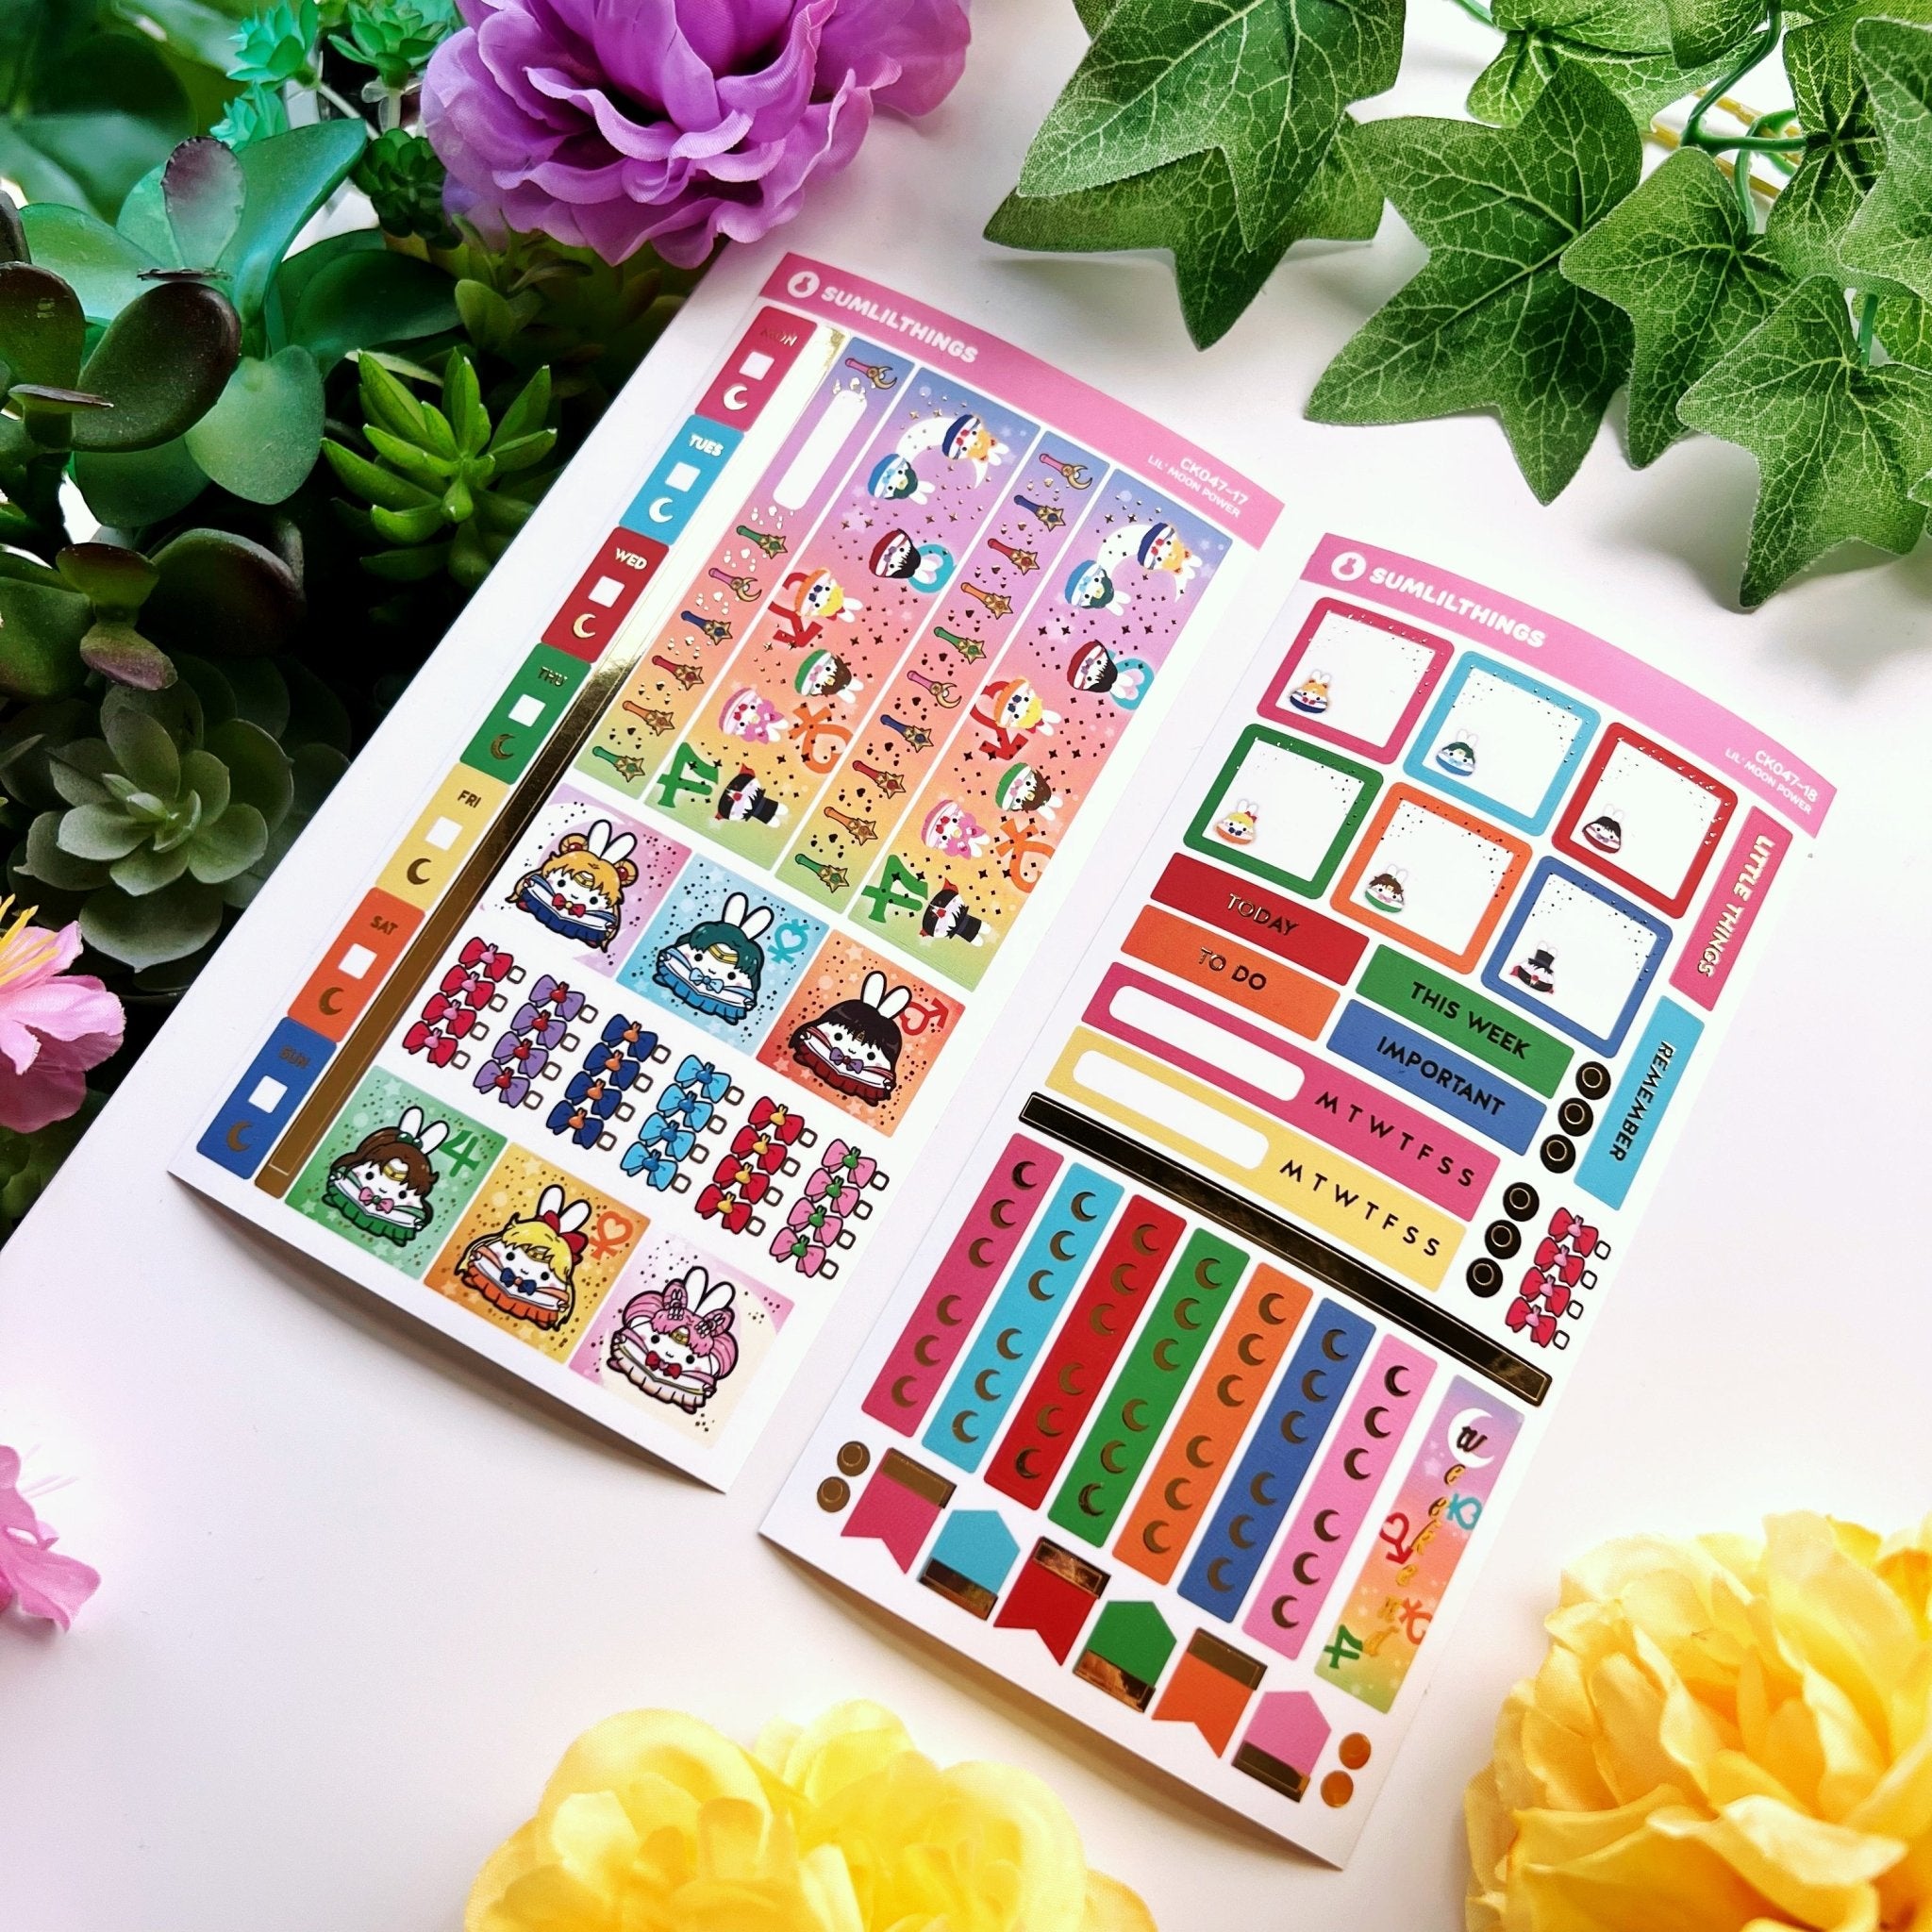 Spring Friends Hobonichi Cousin Kit Planner Stickers